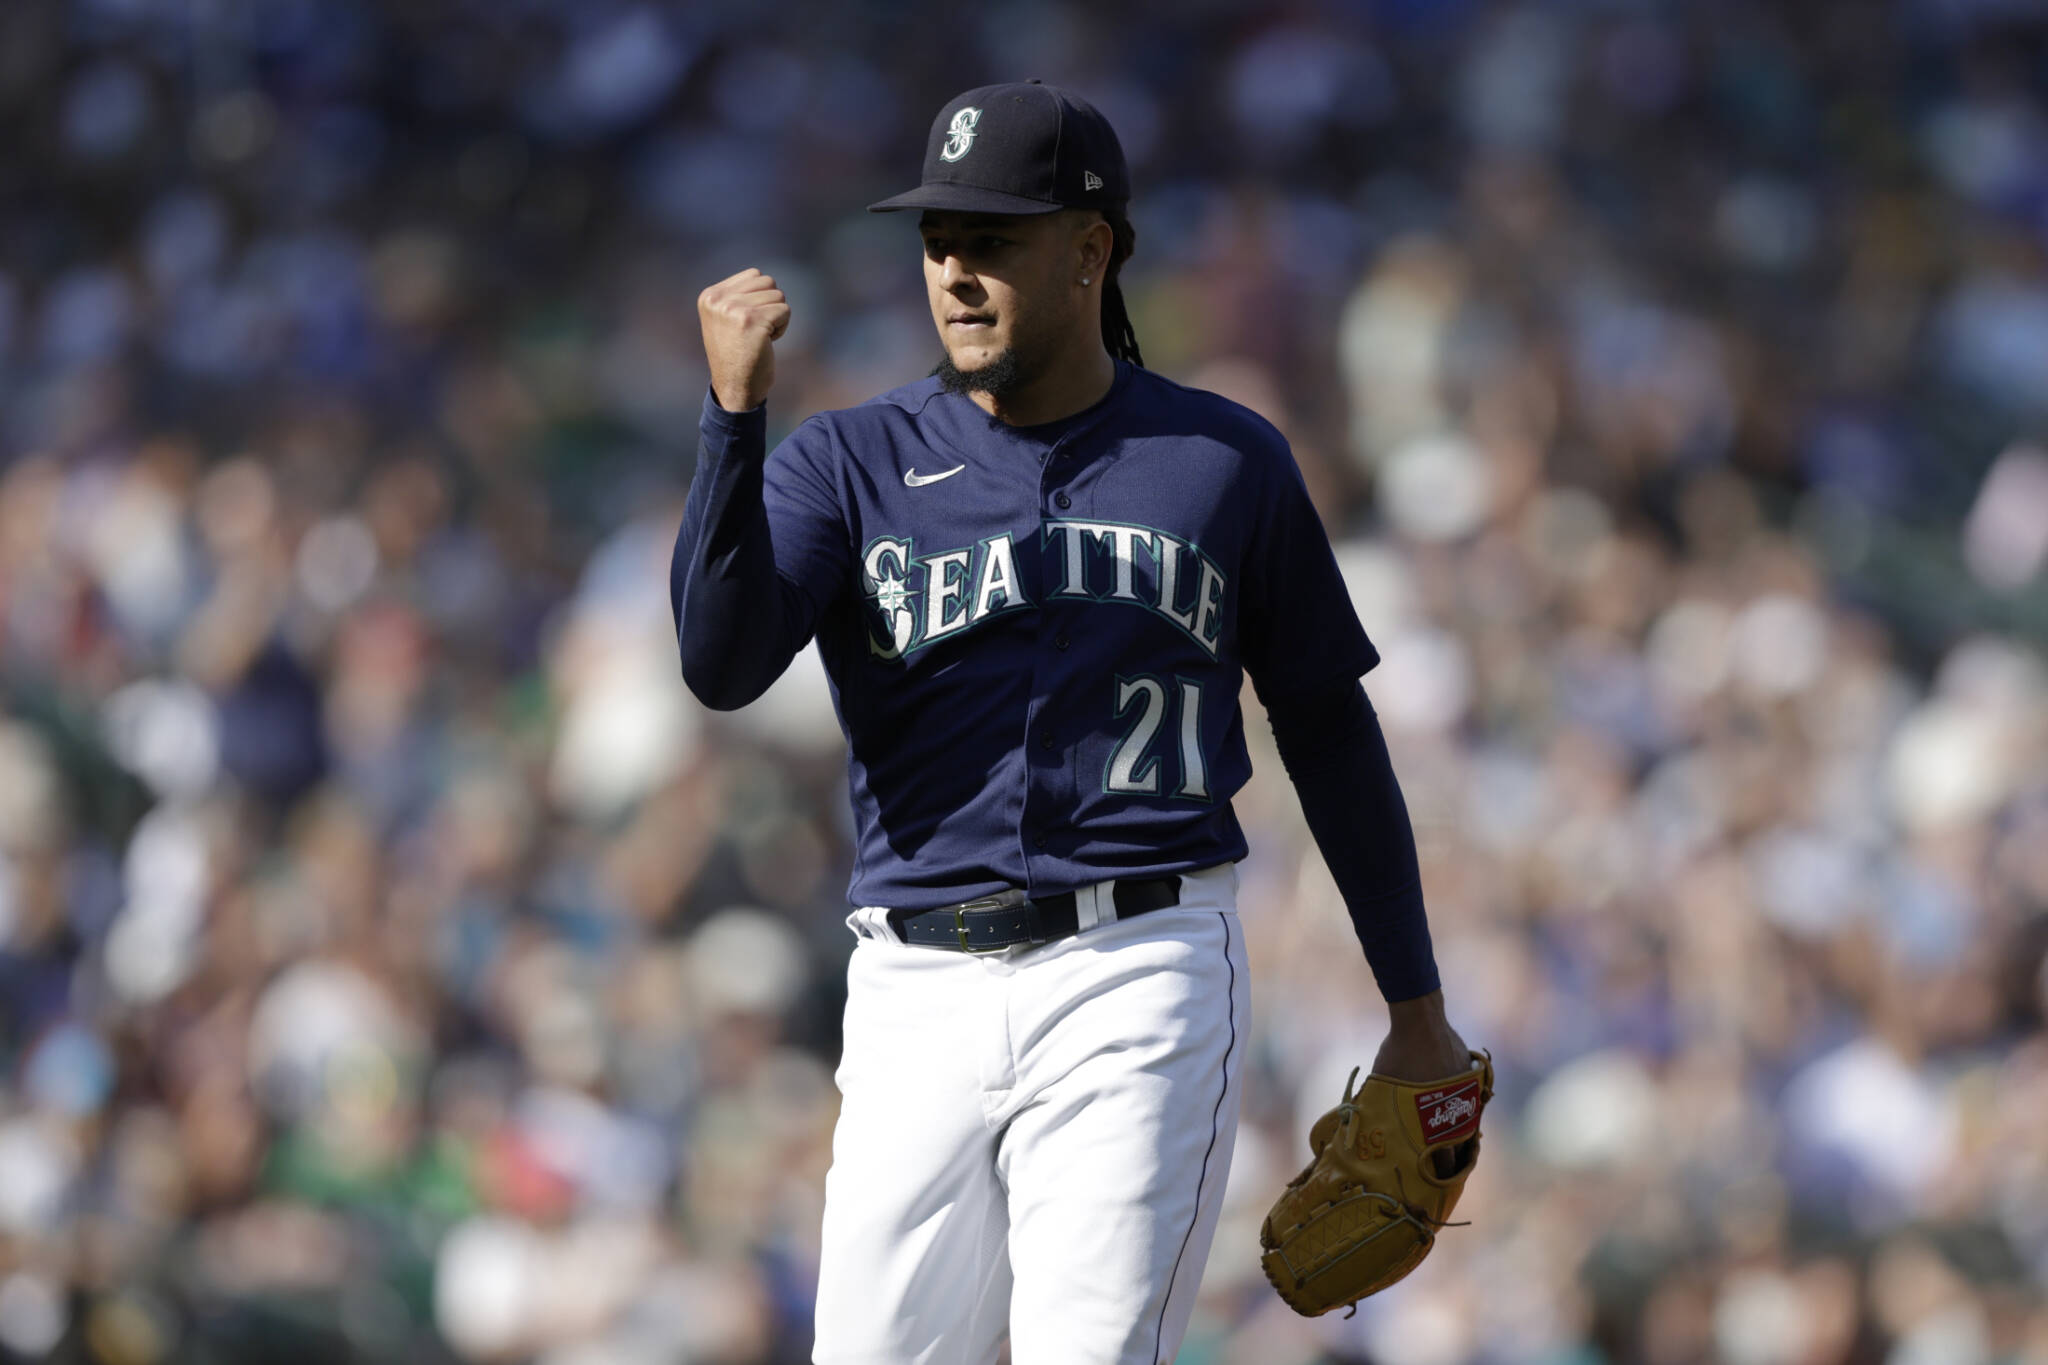 Castillo srikes out 8, Mariners down Athletics